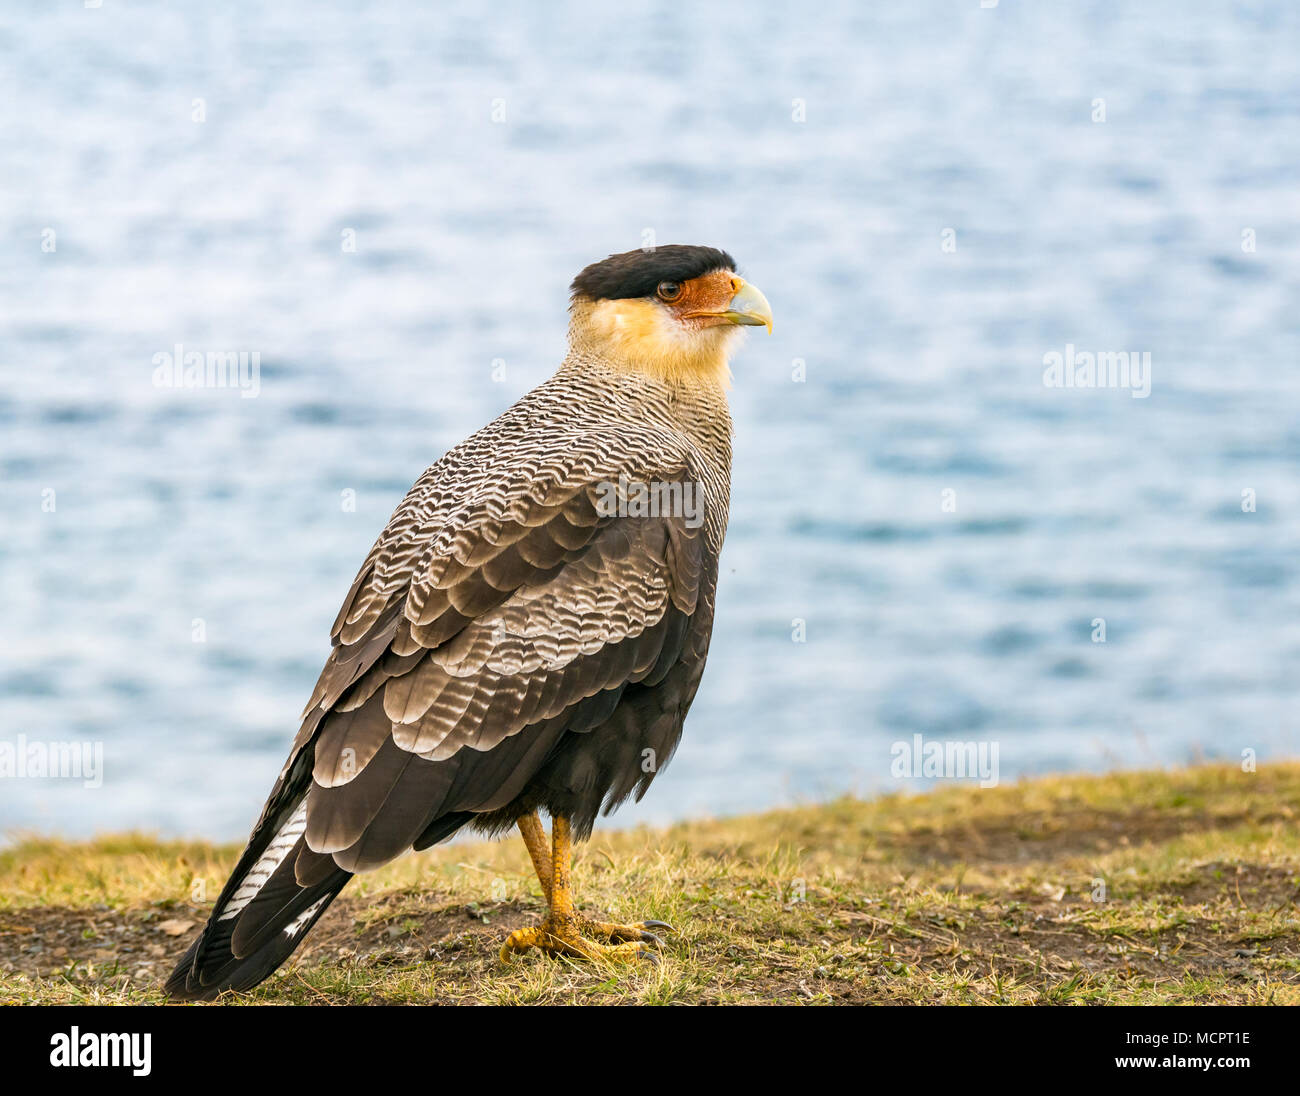 Southern crested caracara, Caracara plancus, Torres del Paine National Park, Patagonia, Chile, South America Stock Photo